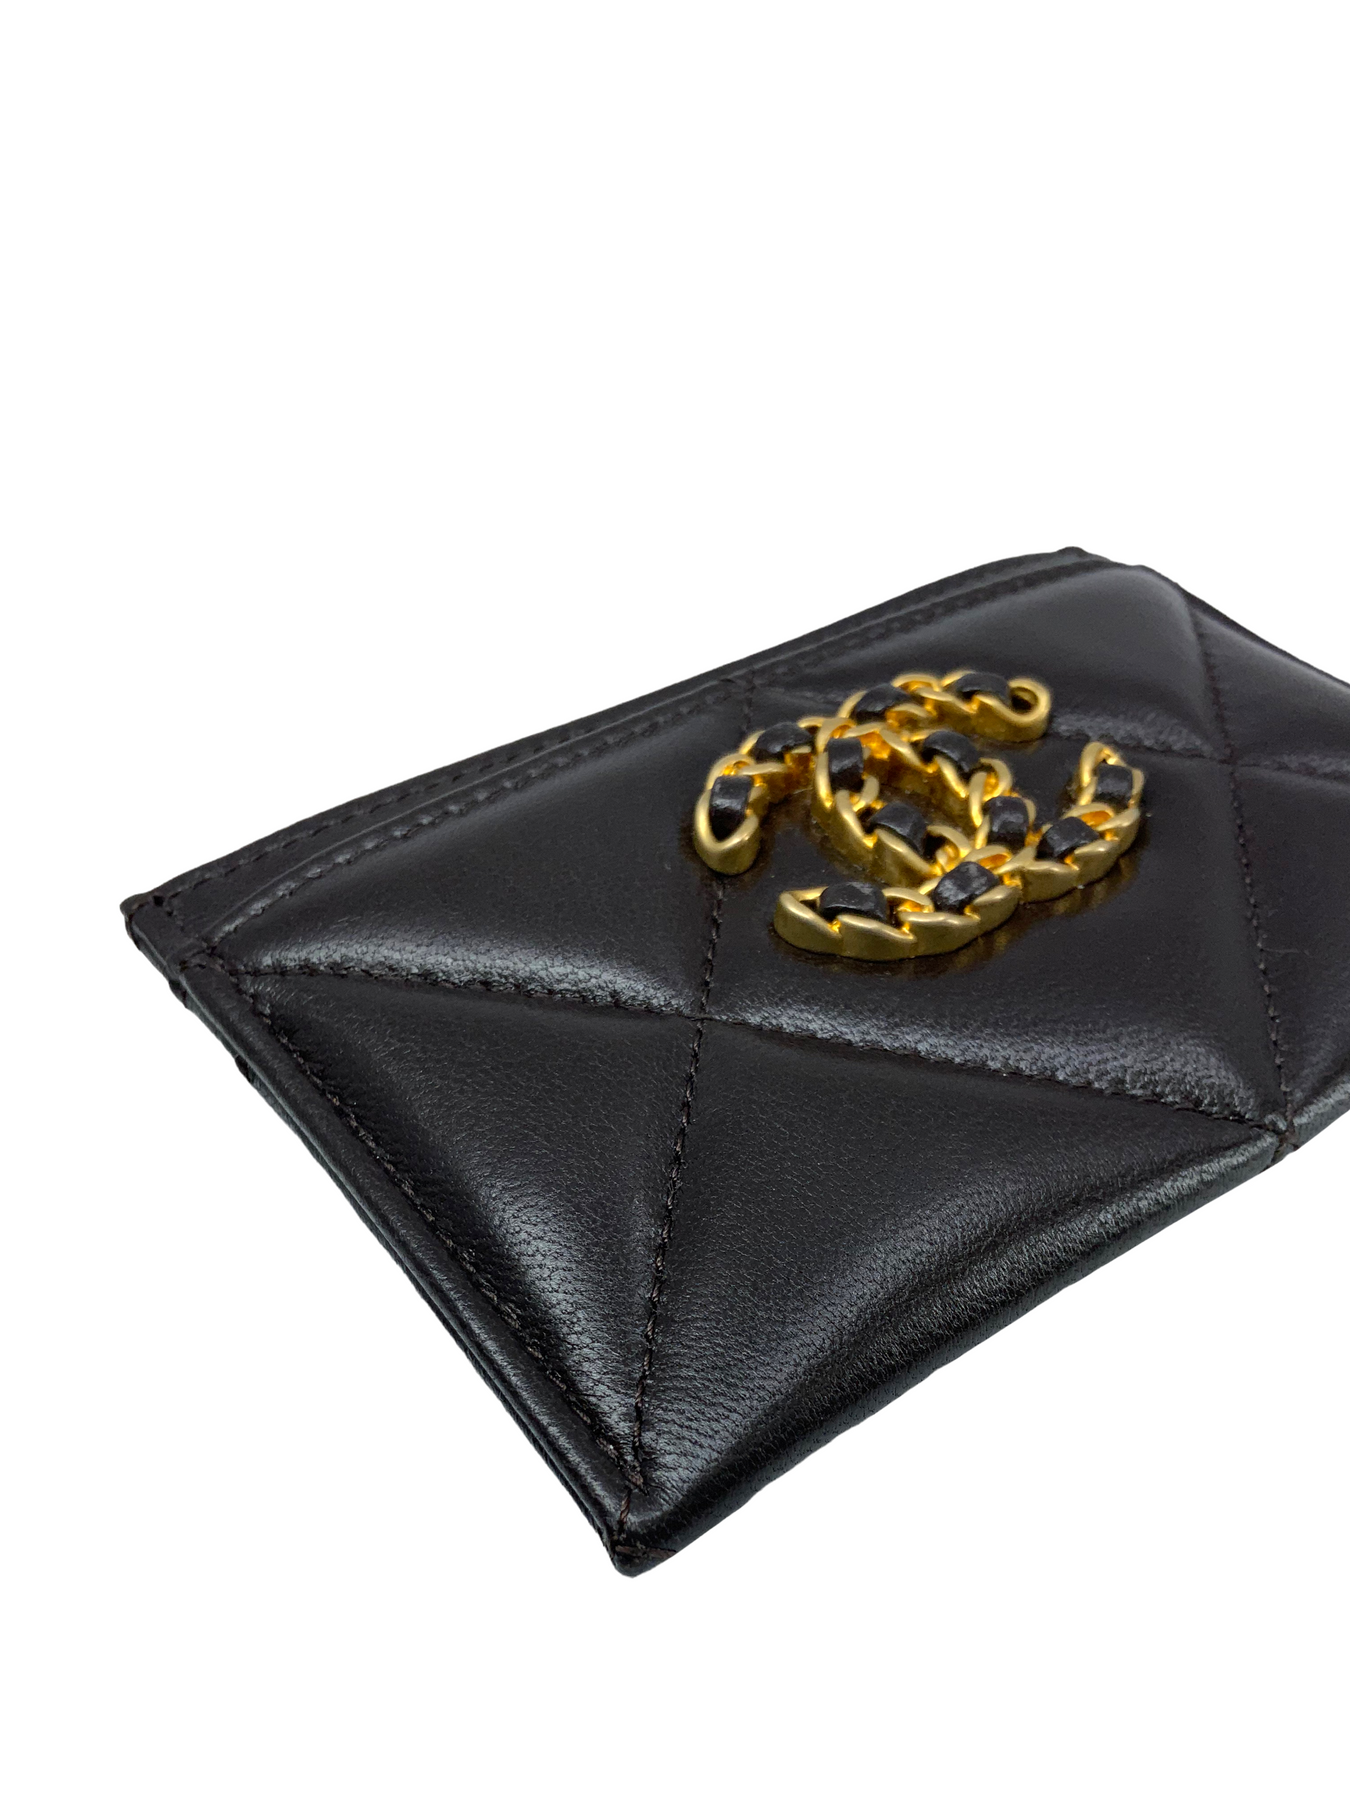 CHANEL Lambskin Quilted Chanel 19 Card Holder - Consigned Designs